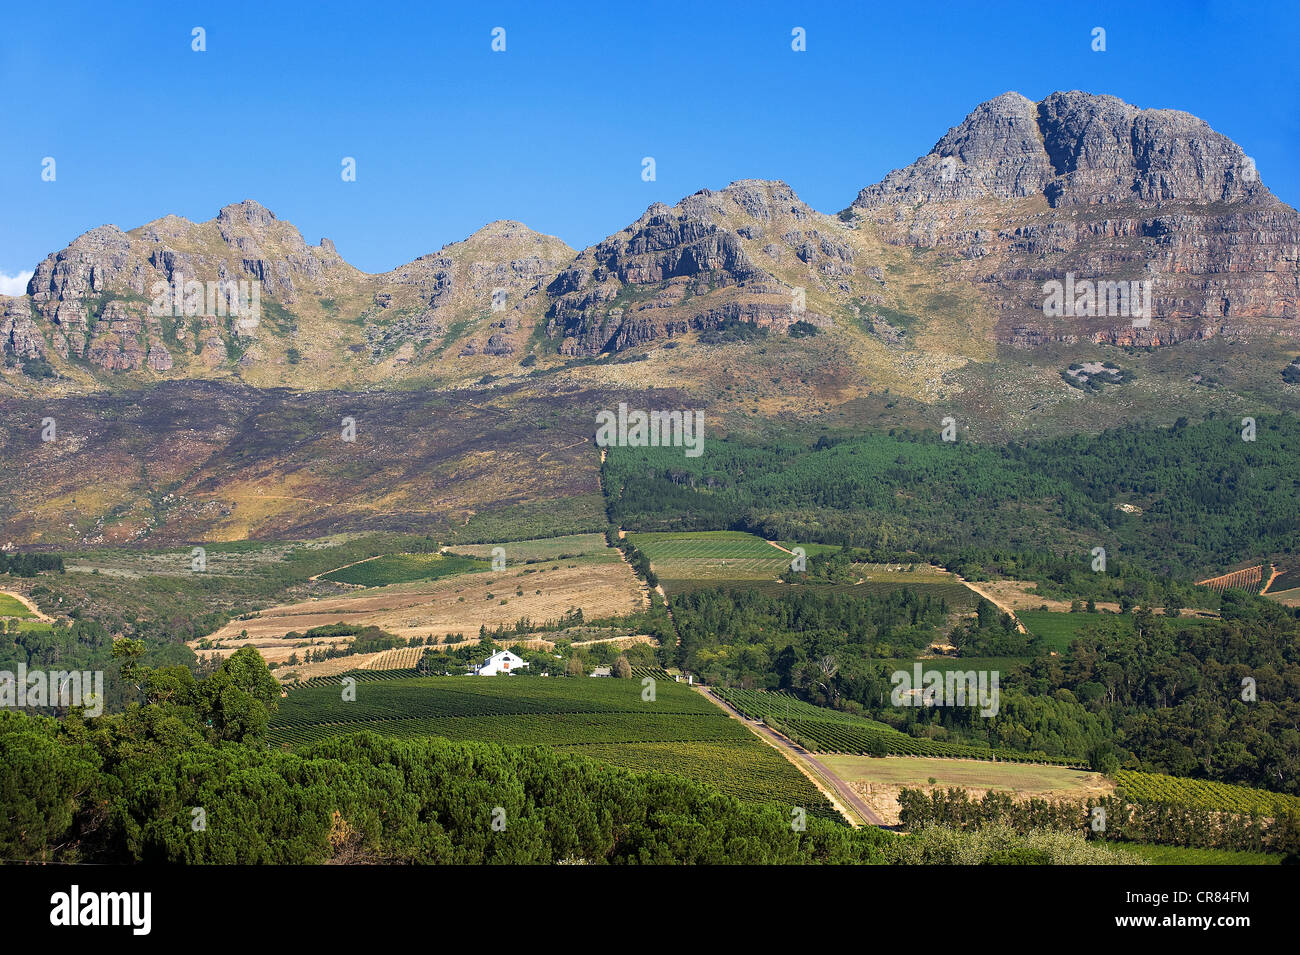 South Africa, Western Cape, Stellenbosch, vineyards at the foot of the Hedelberg mountain Stock Photo